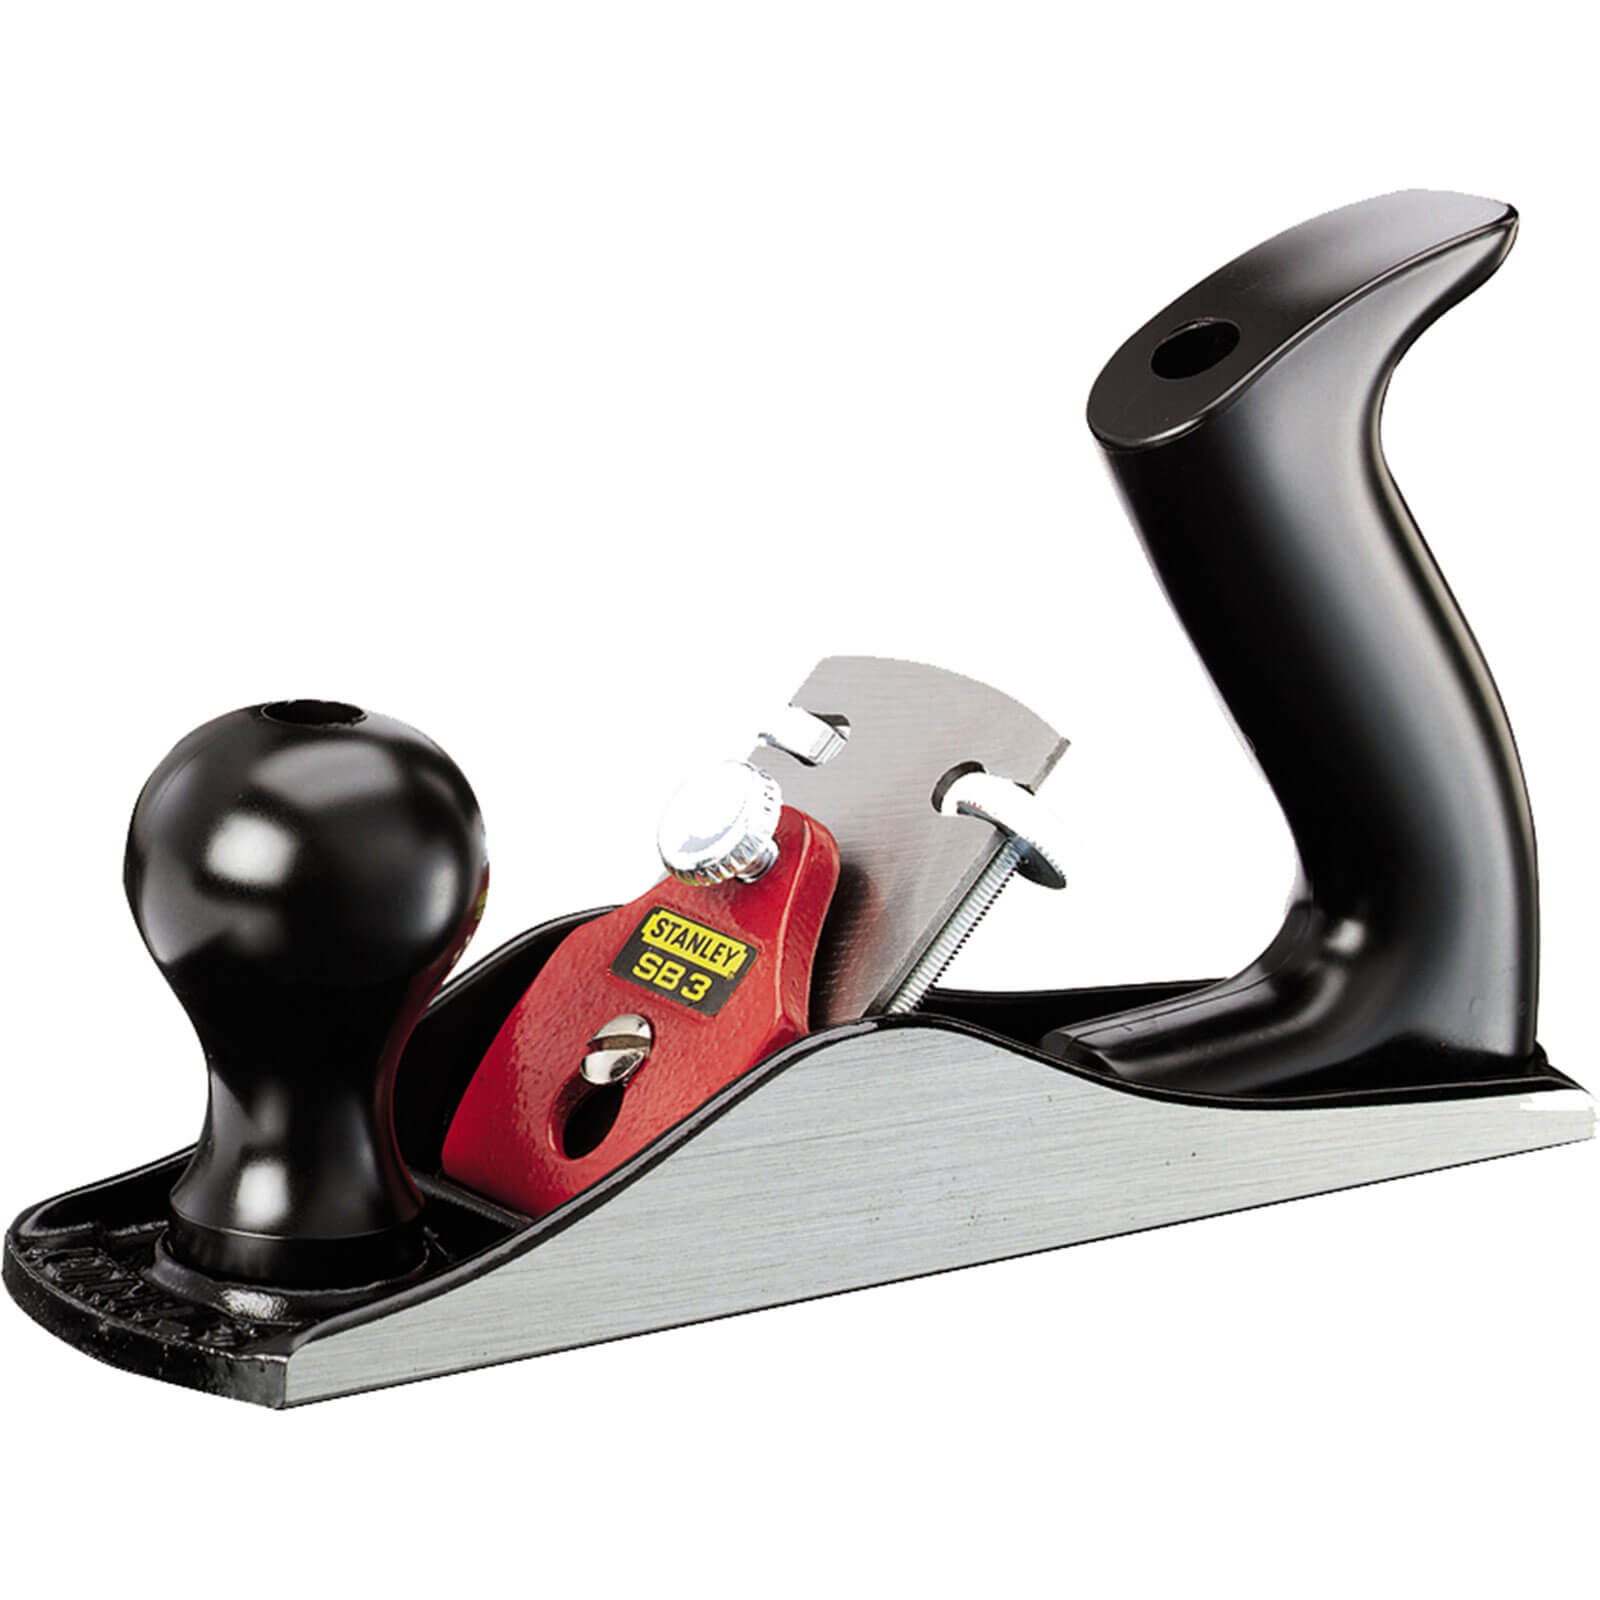 Image of Stanley SB3 Light Duty Smoothing Plane